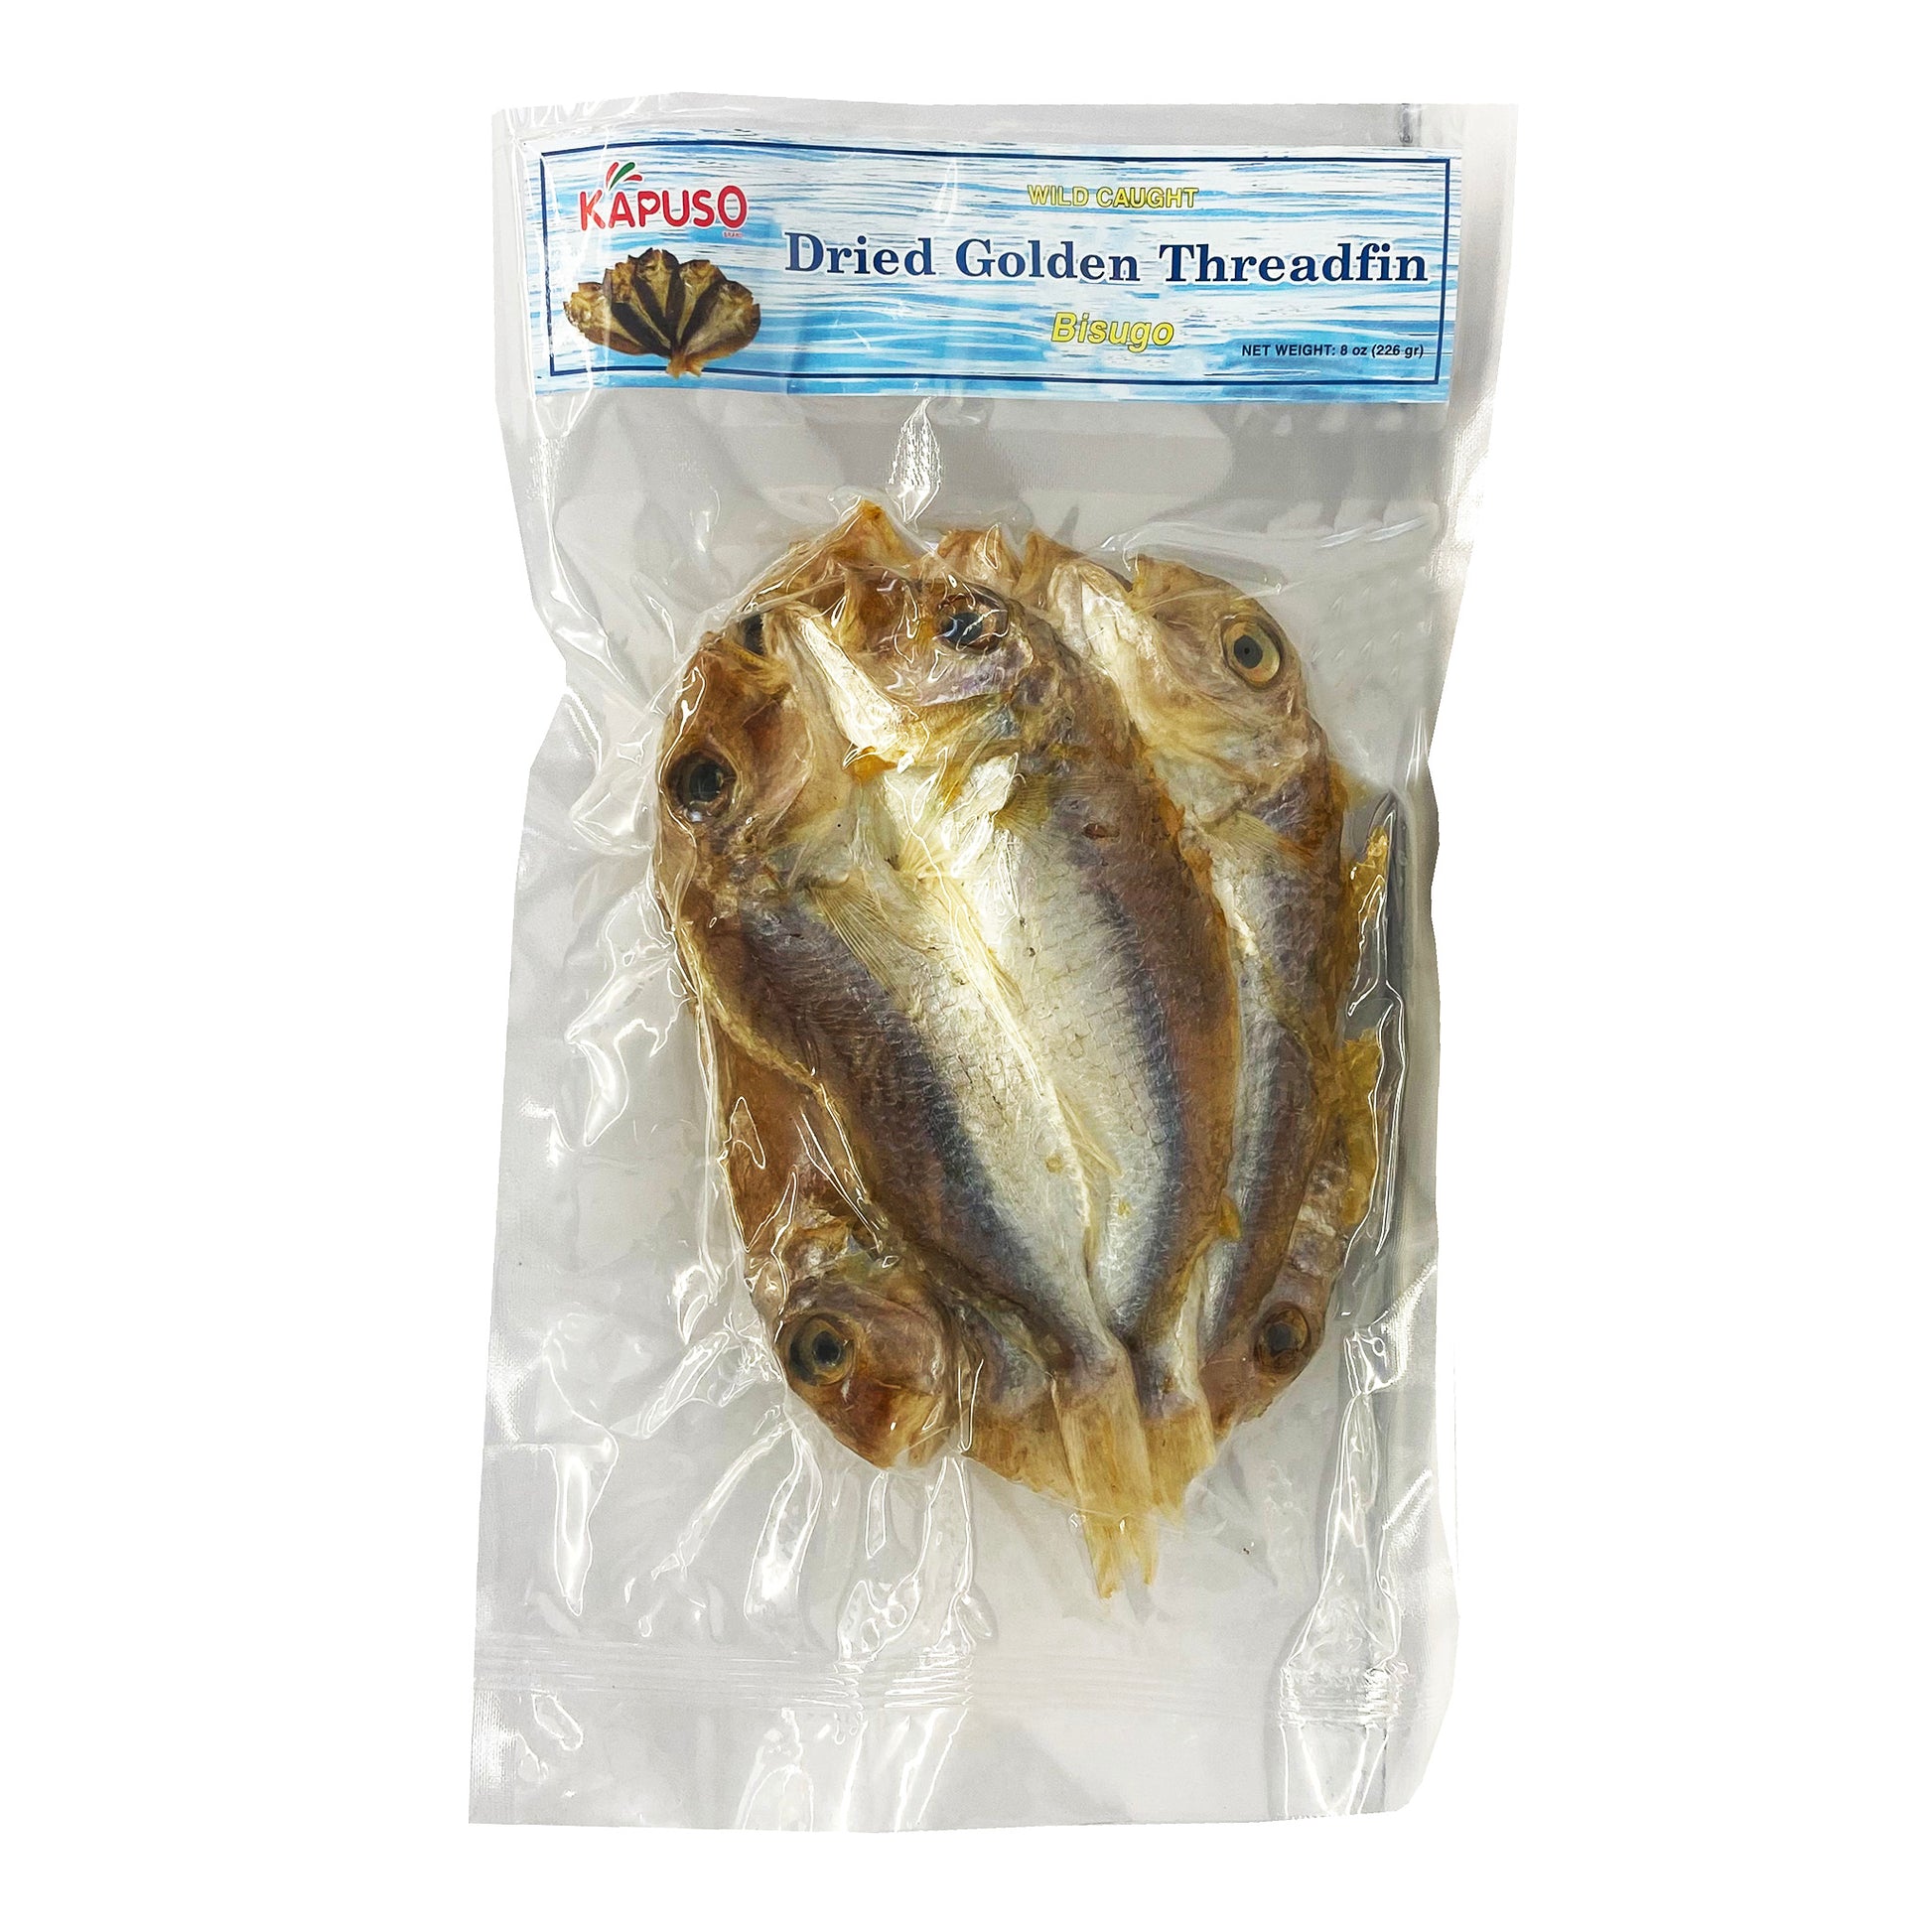 Front graphic image of Kapuso Dried Golden Threadfin - Bisugo 8oz (226g)